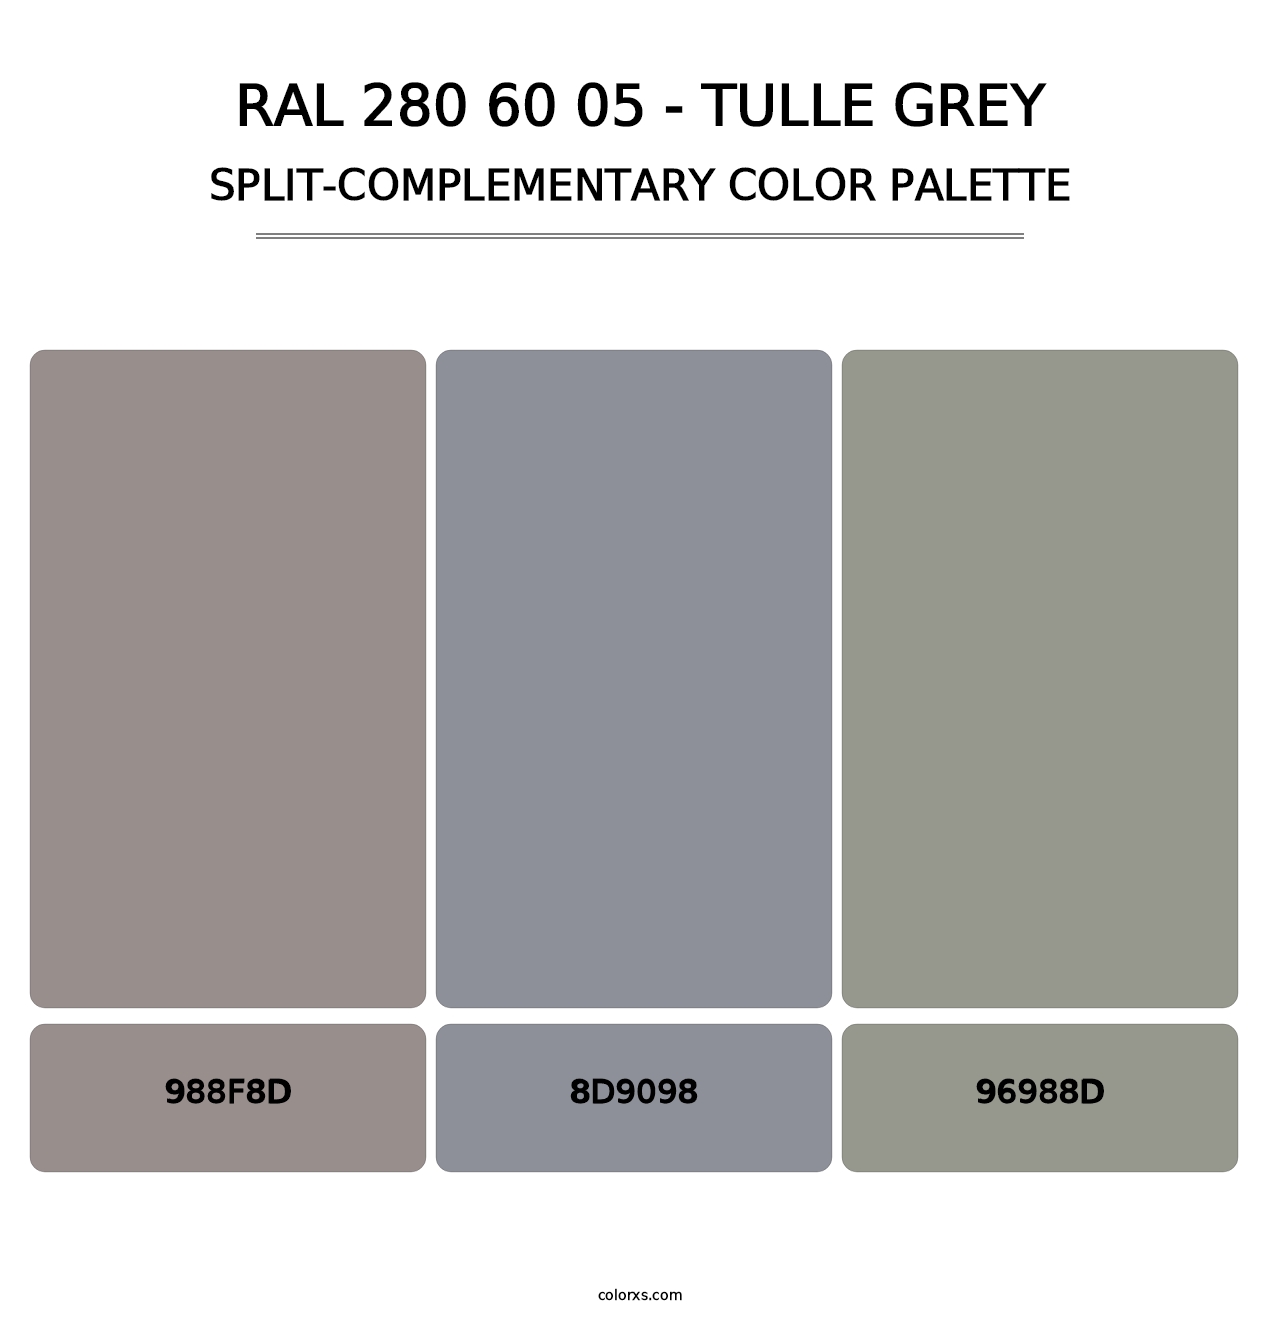 RAL 280 60 05 - Tulle Grey - Split-Complementary Color Palette